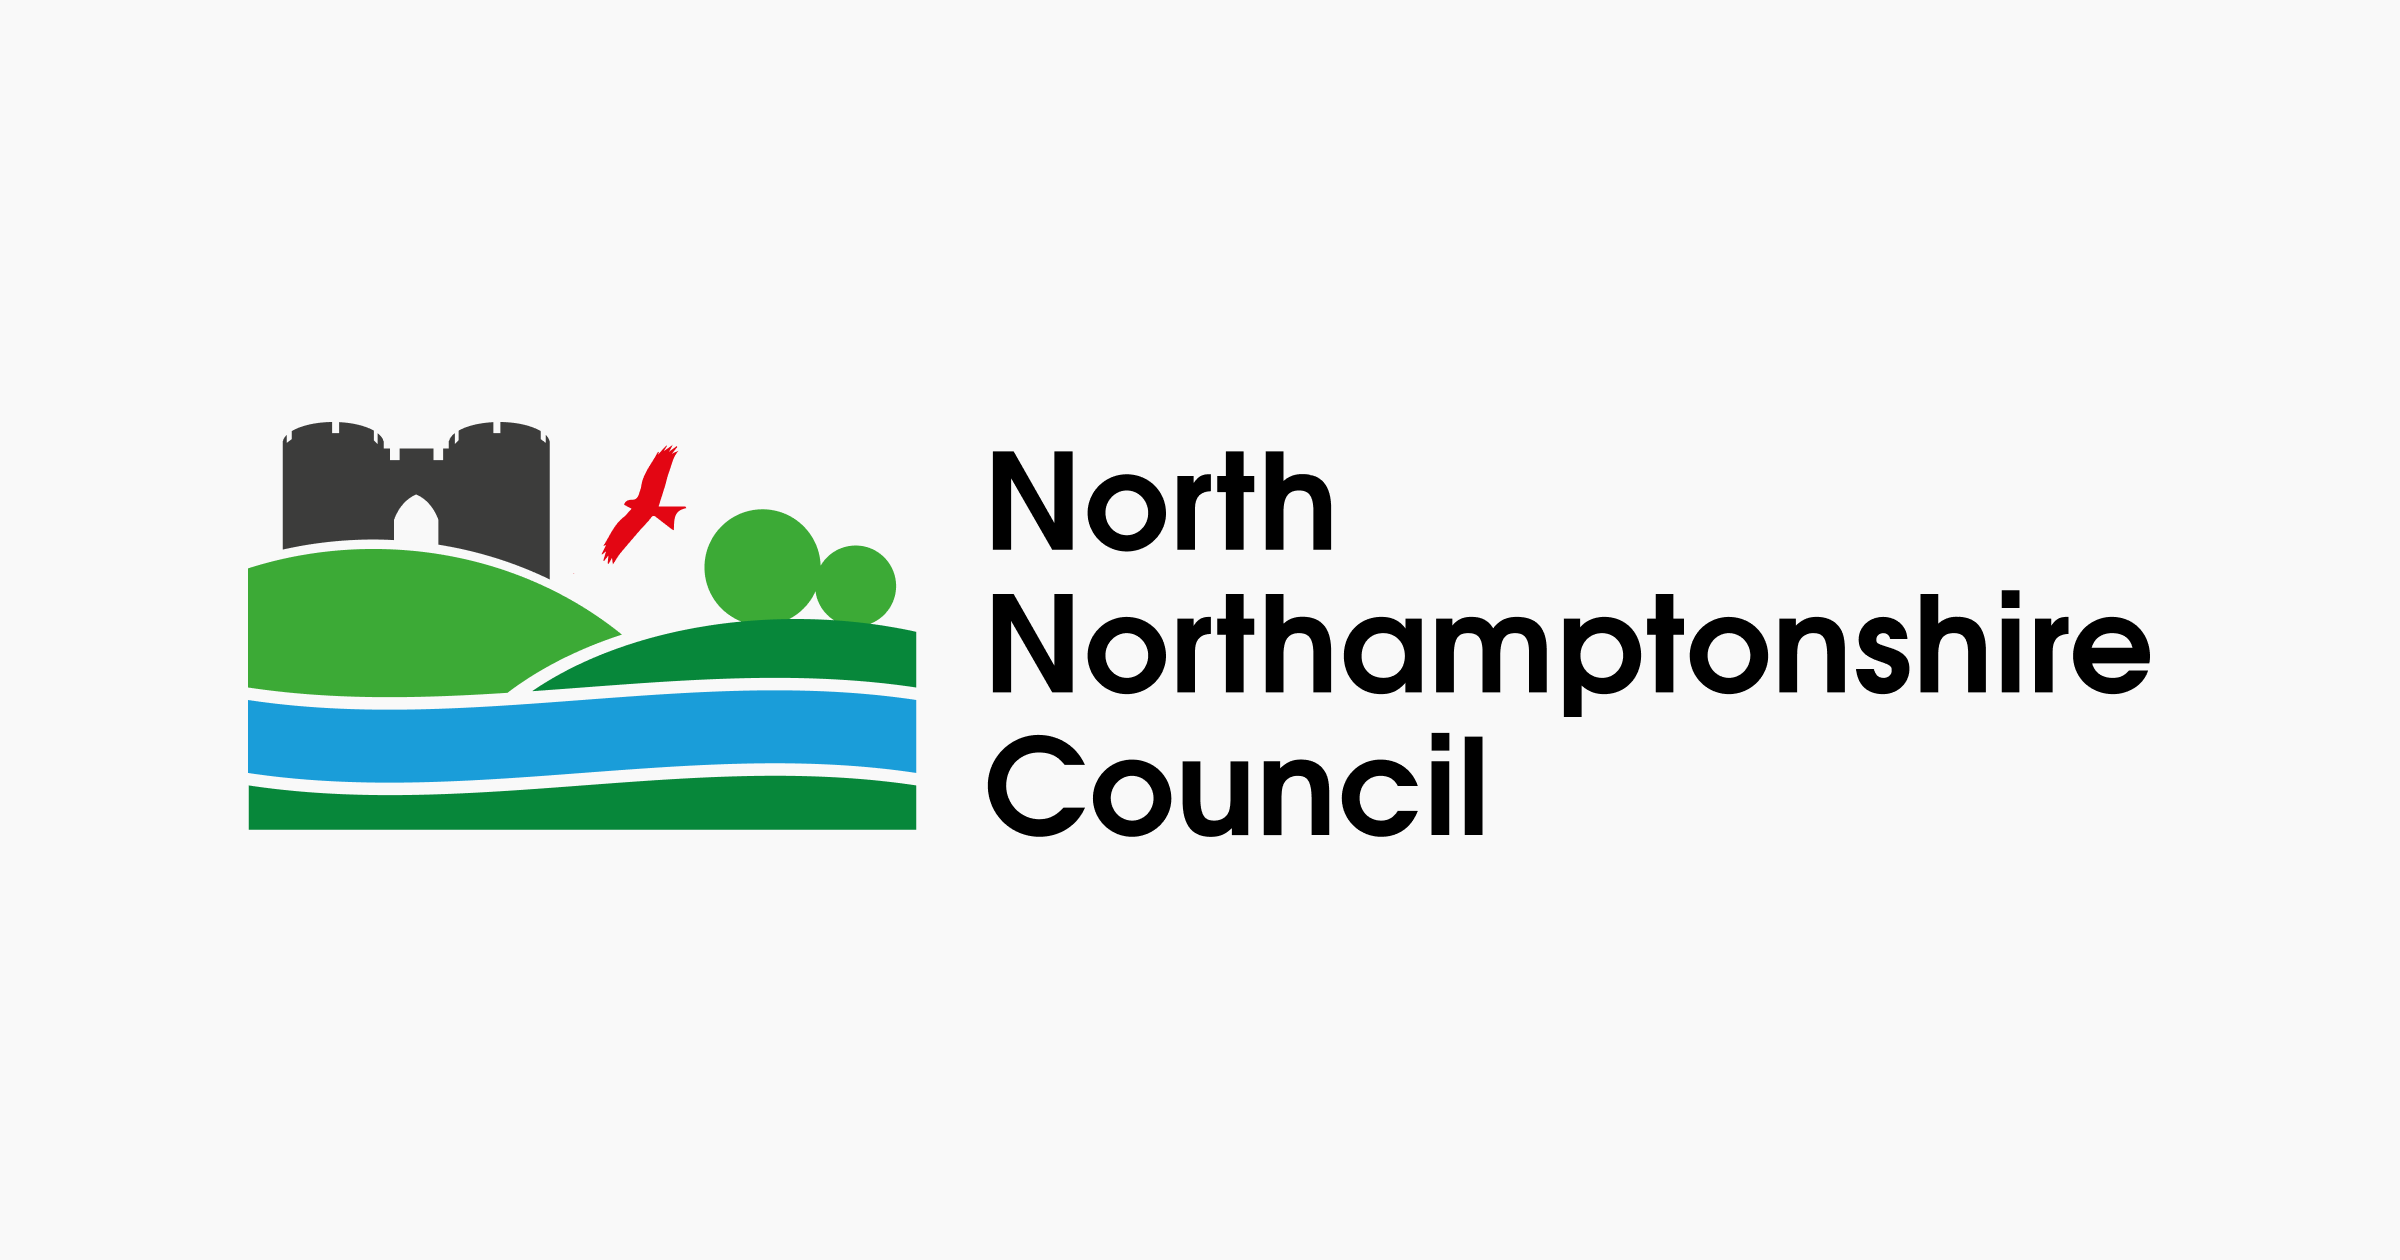 apply-for-council-tax-support-or-housing-benefit-north